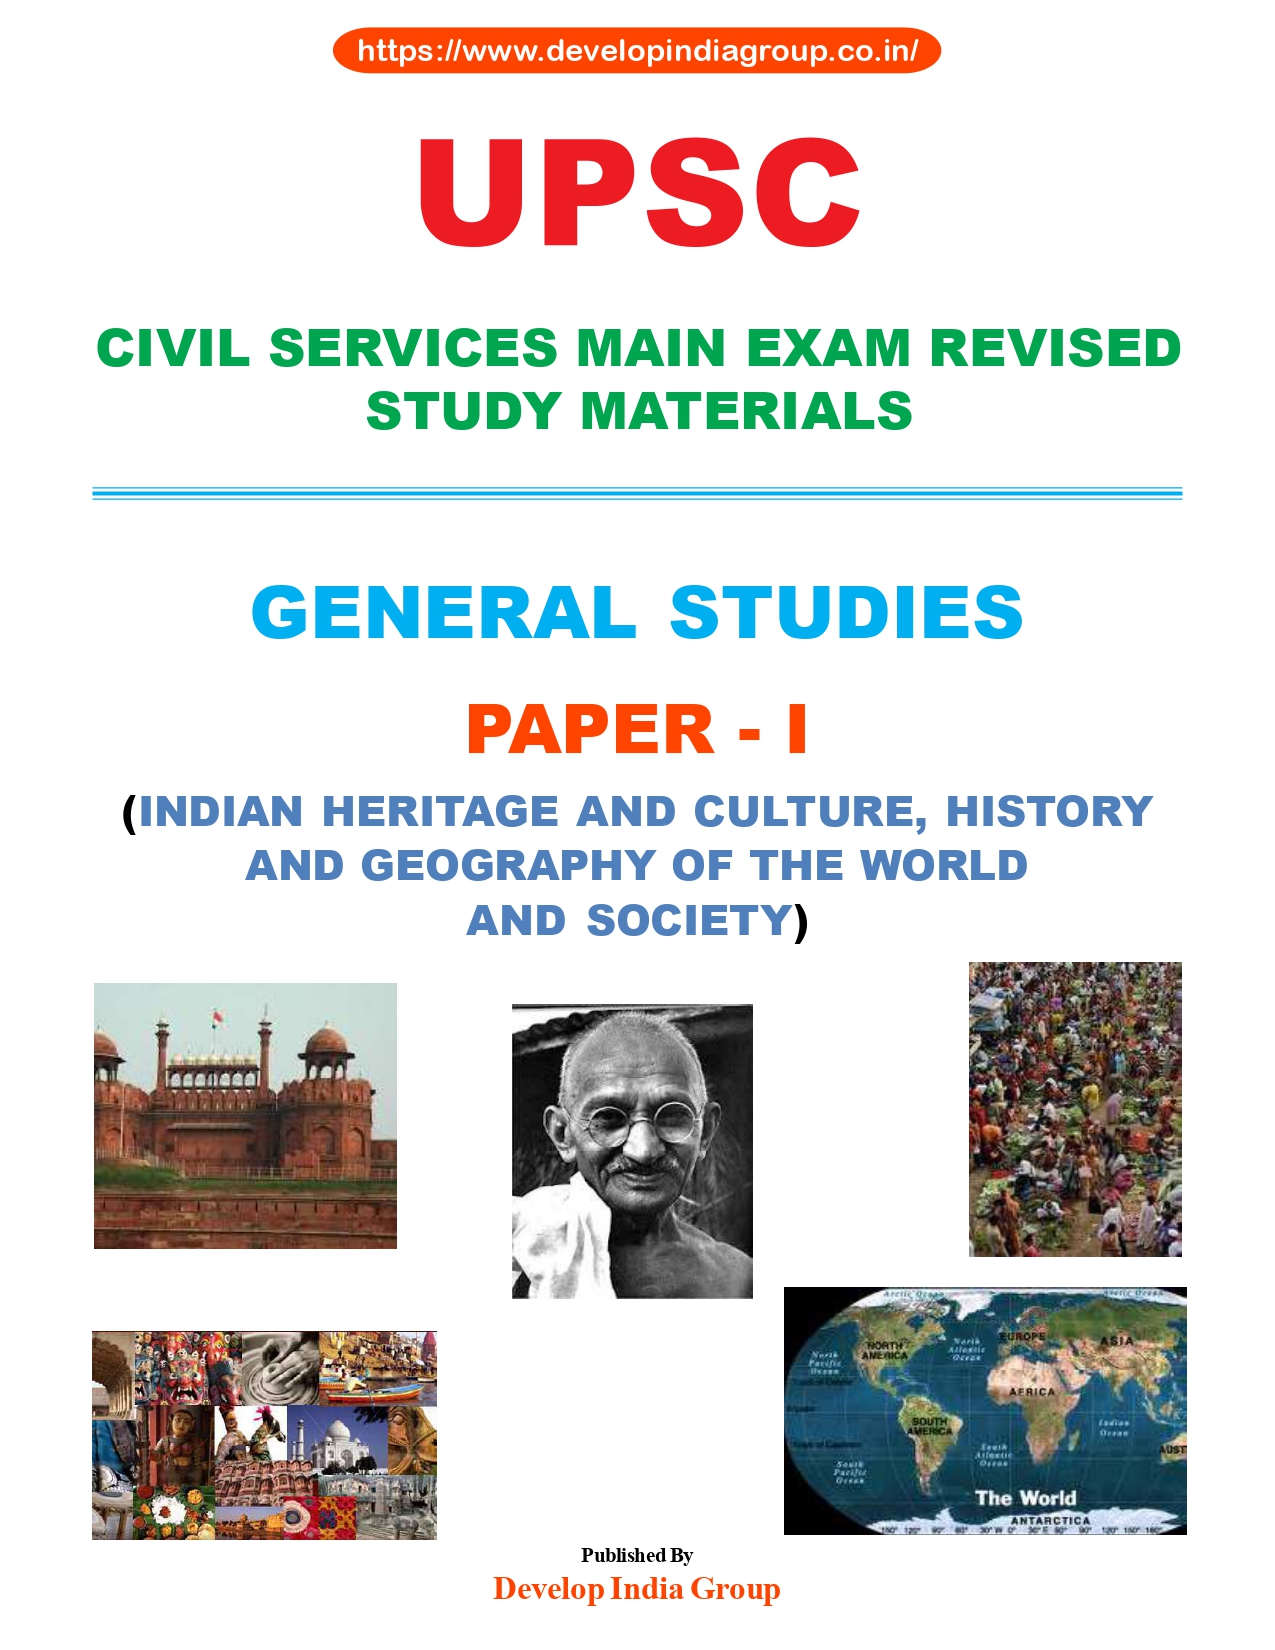 Indian Heritage and Culture, History and Geography of the World and Society cover